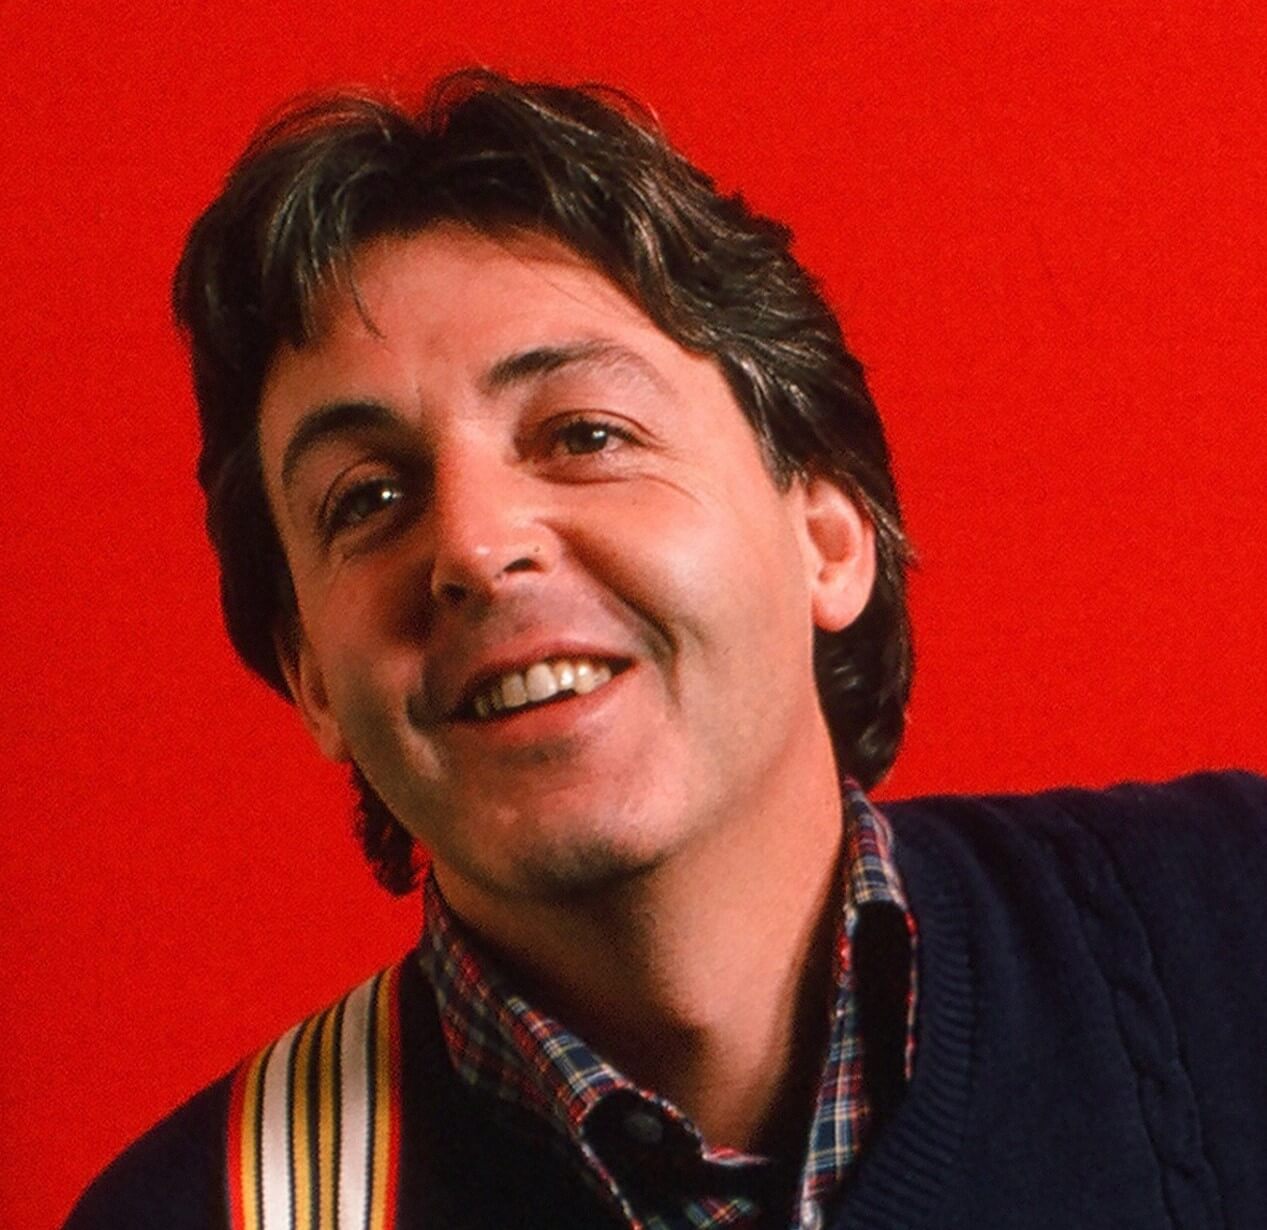 Paul McCartney with a red background